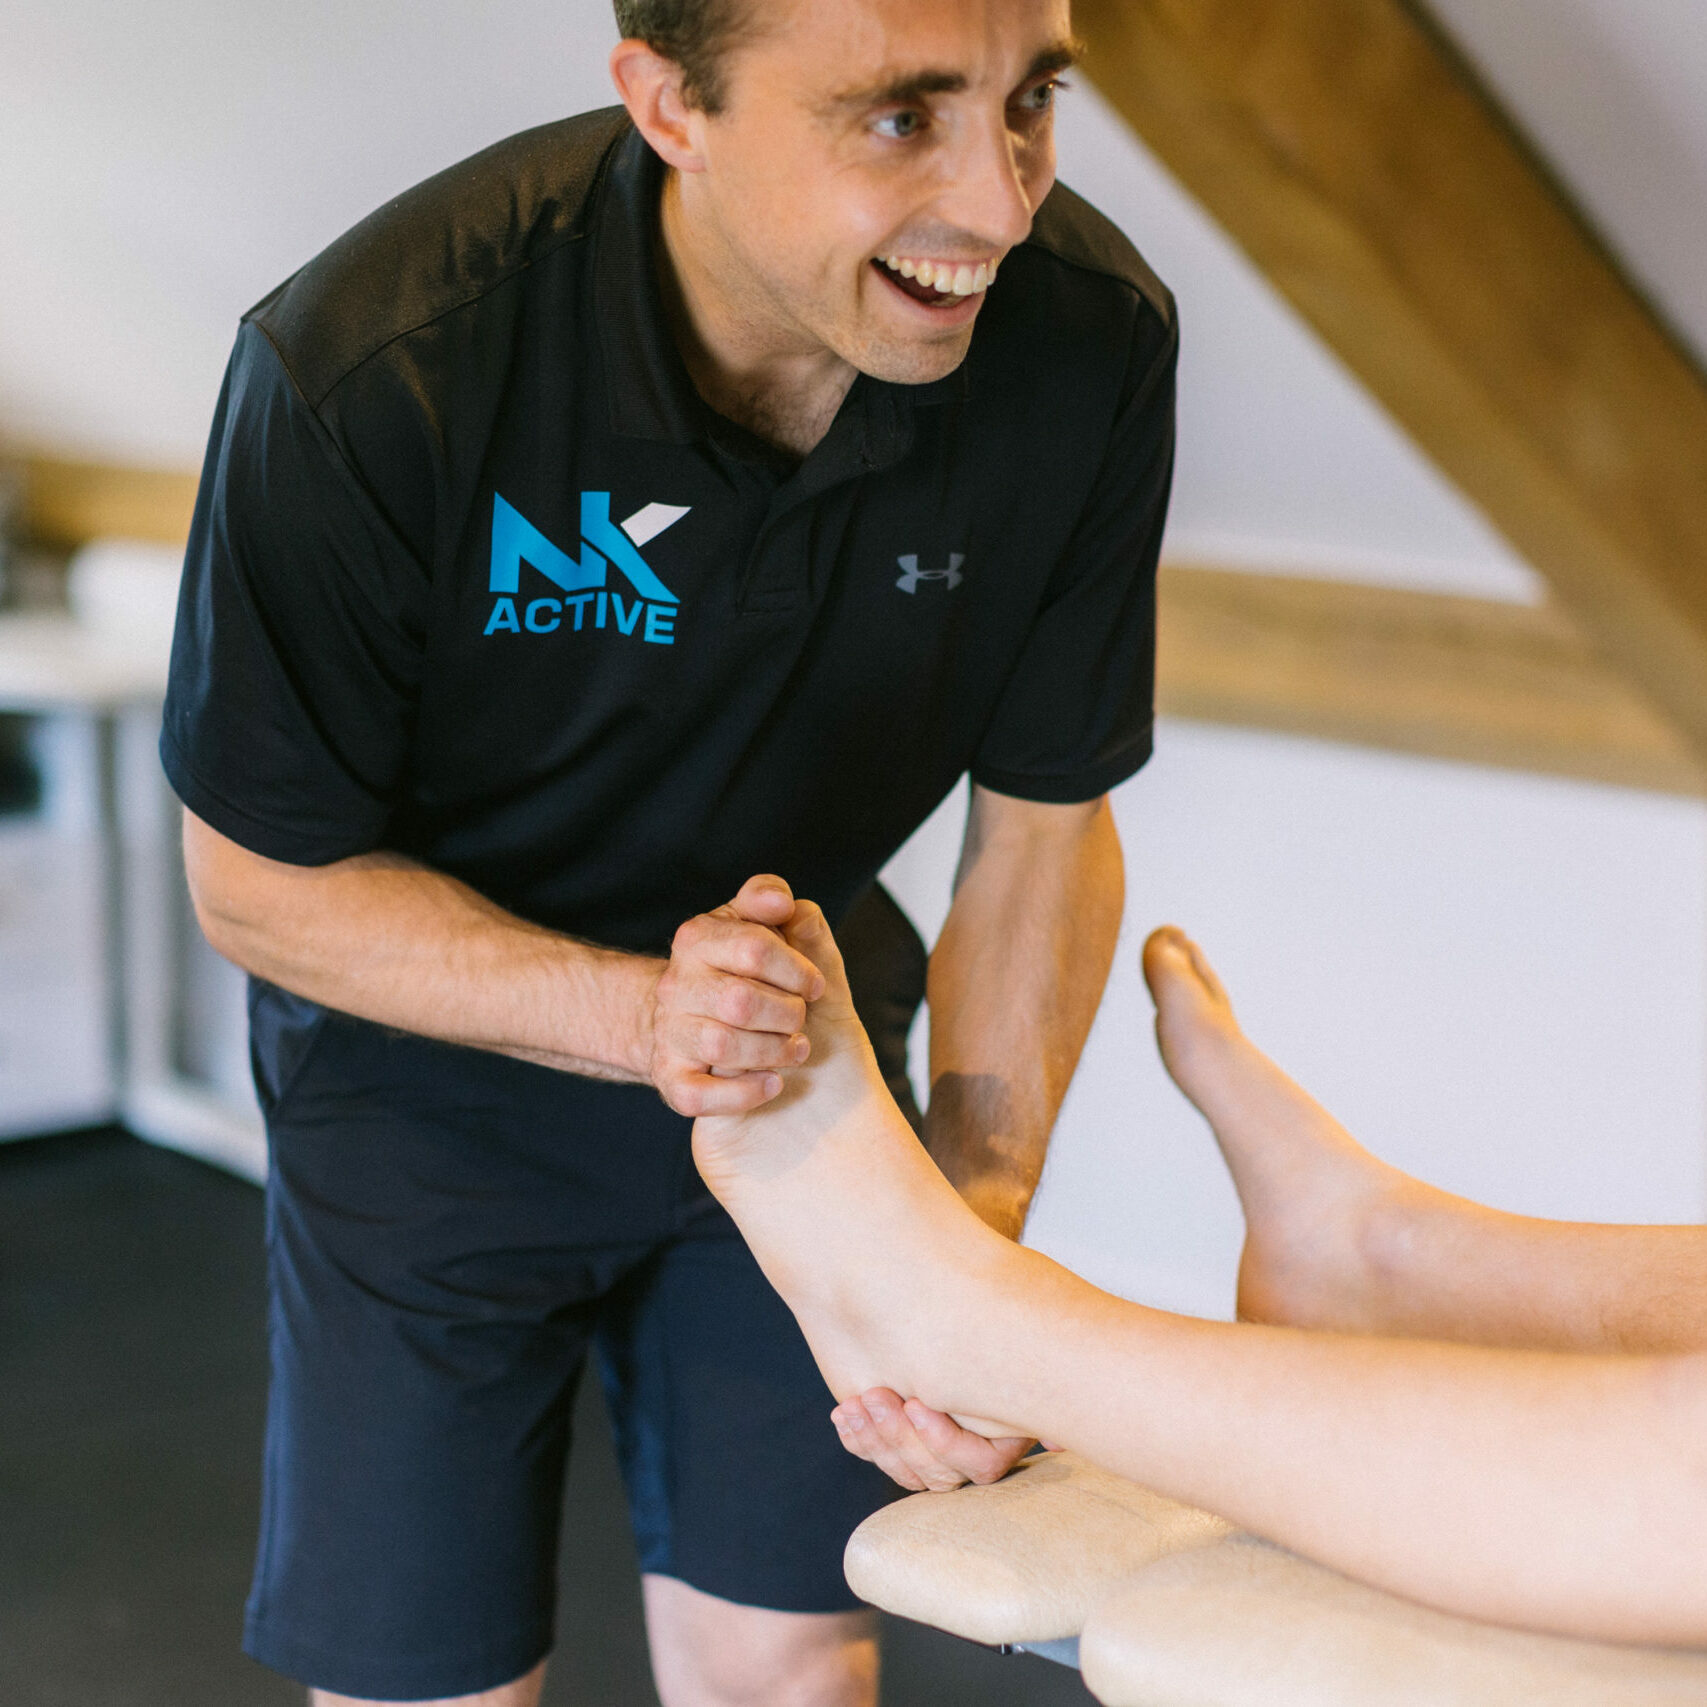 foot and ankle injuries explained | NK Active